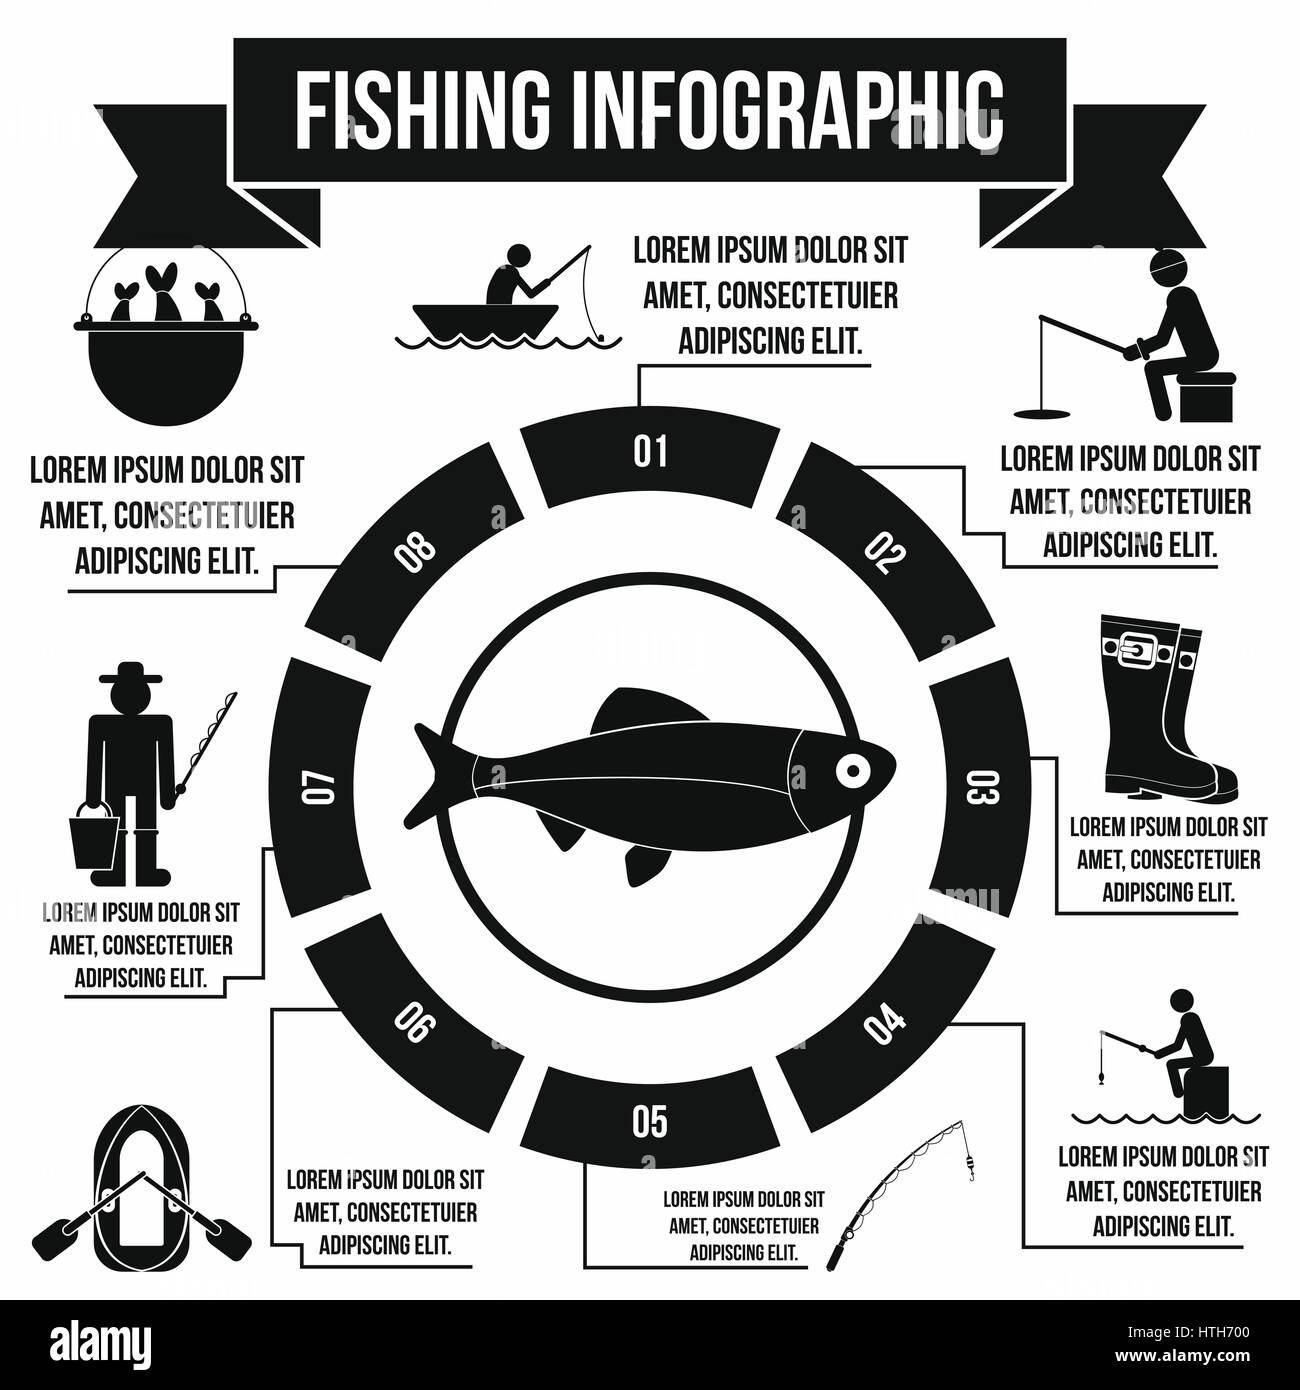 Fishing infographic elements, simple style  Stock Vector